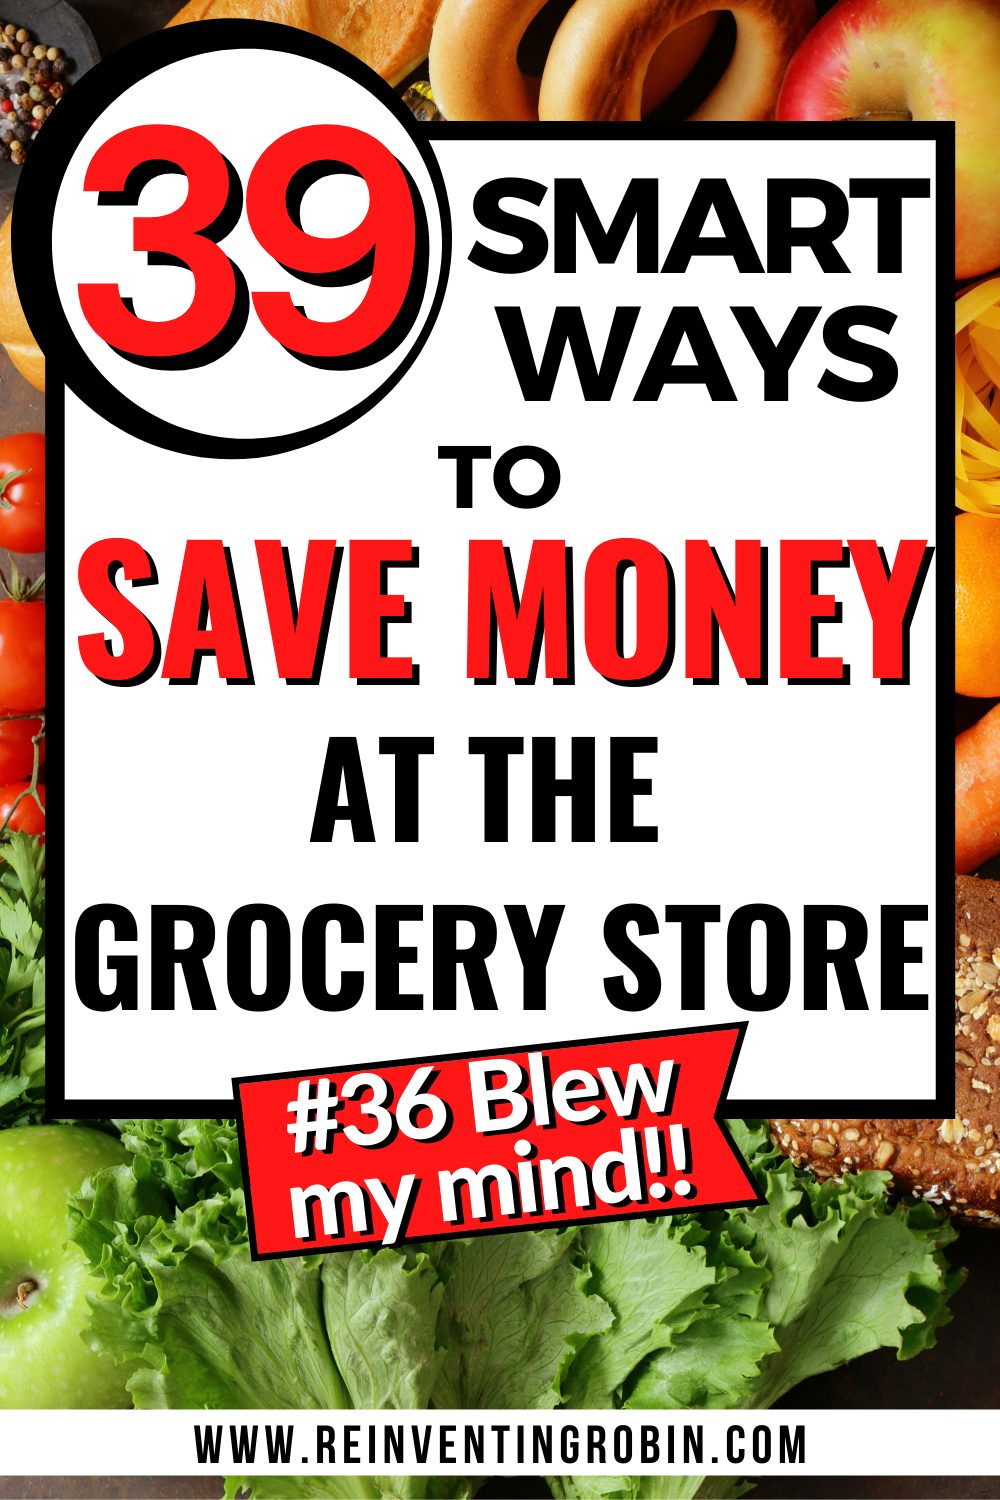 Texas says 39 Smart Ways to Save Money at the Grocery Store #36 Blew My Mind! With food in the background.